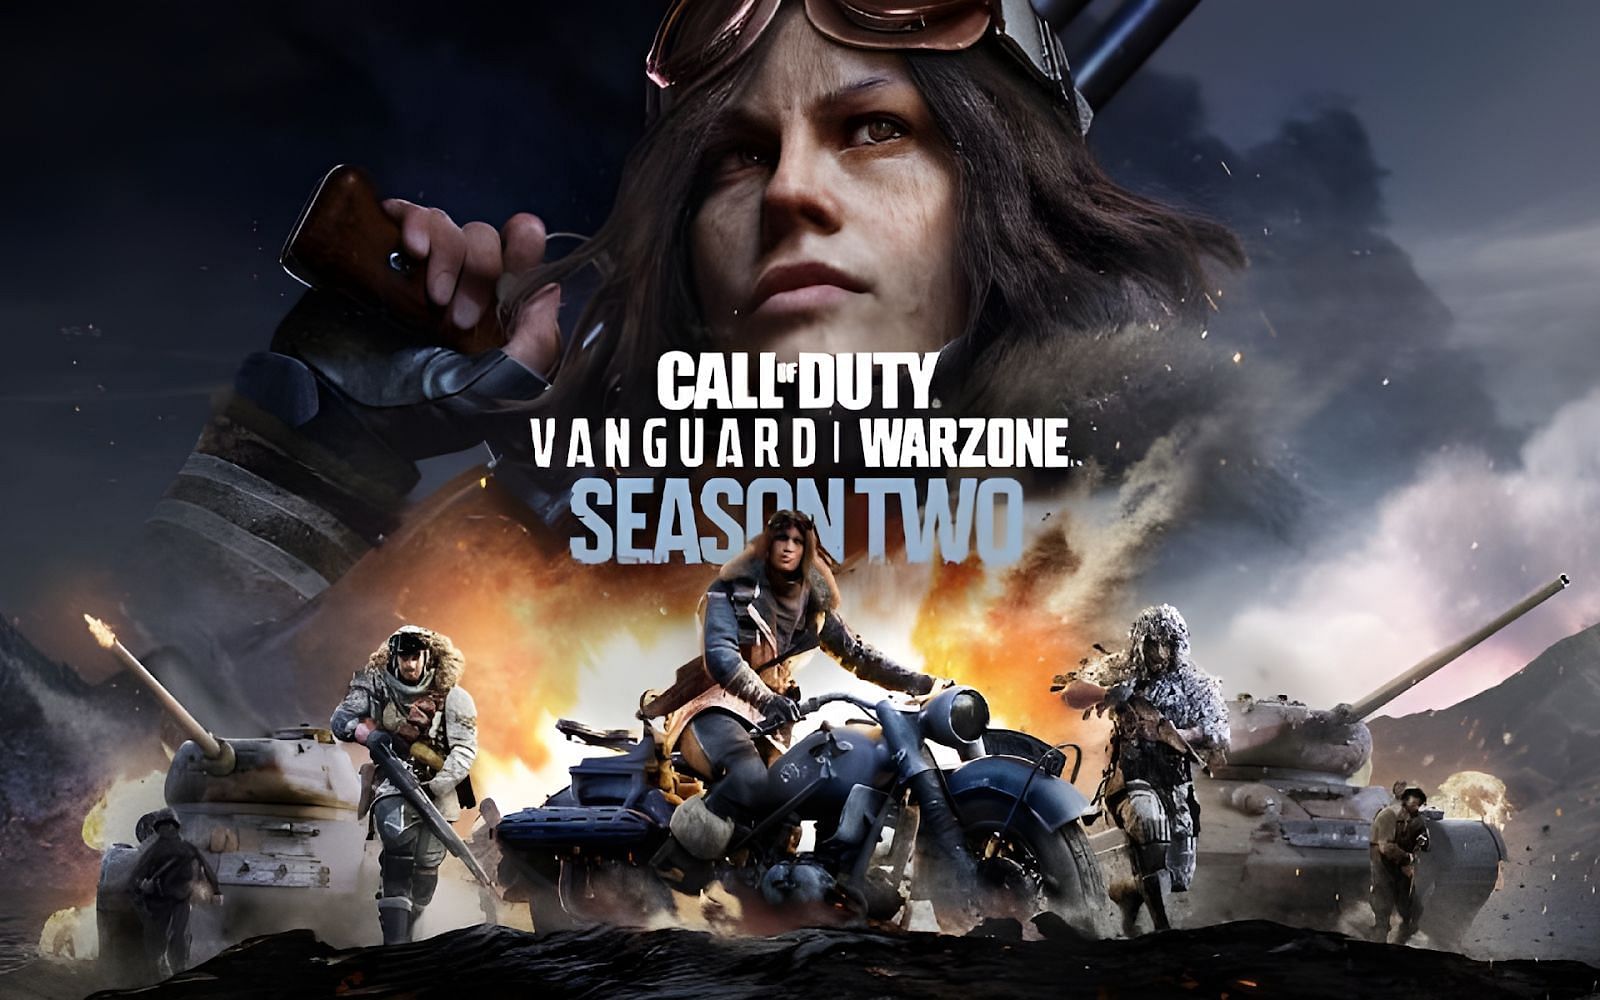 Vanguard and Warzone Season Two launches February 14 (Image by Activision)